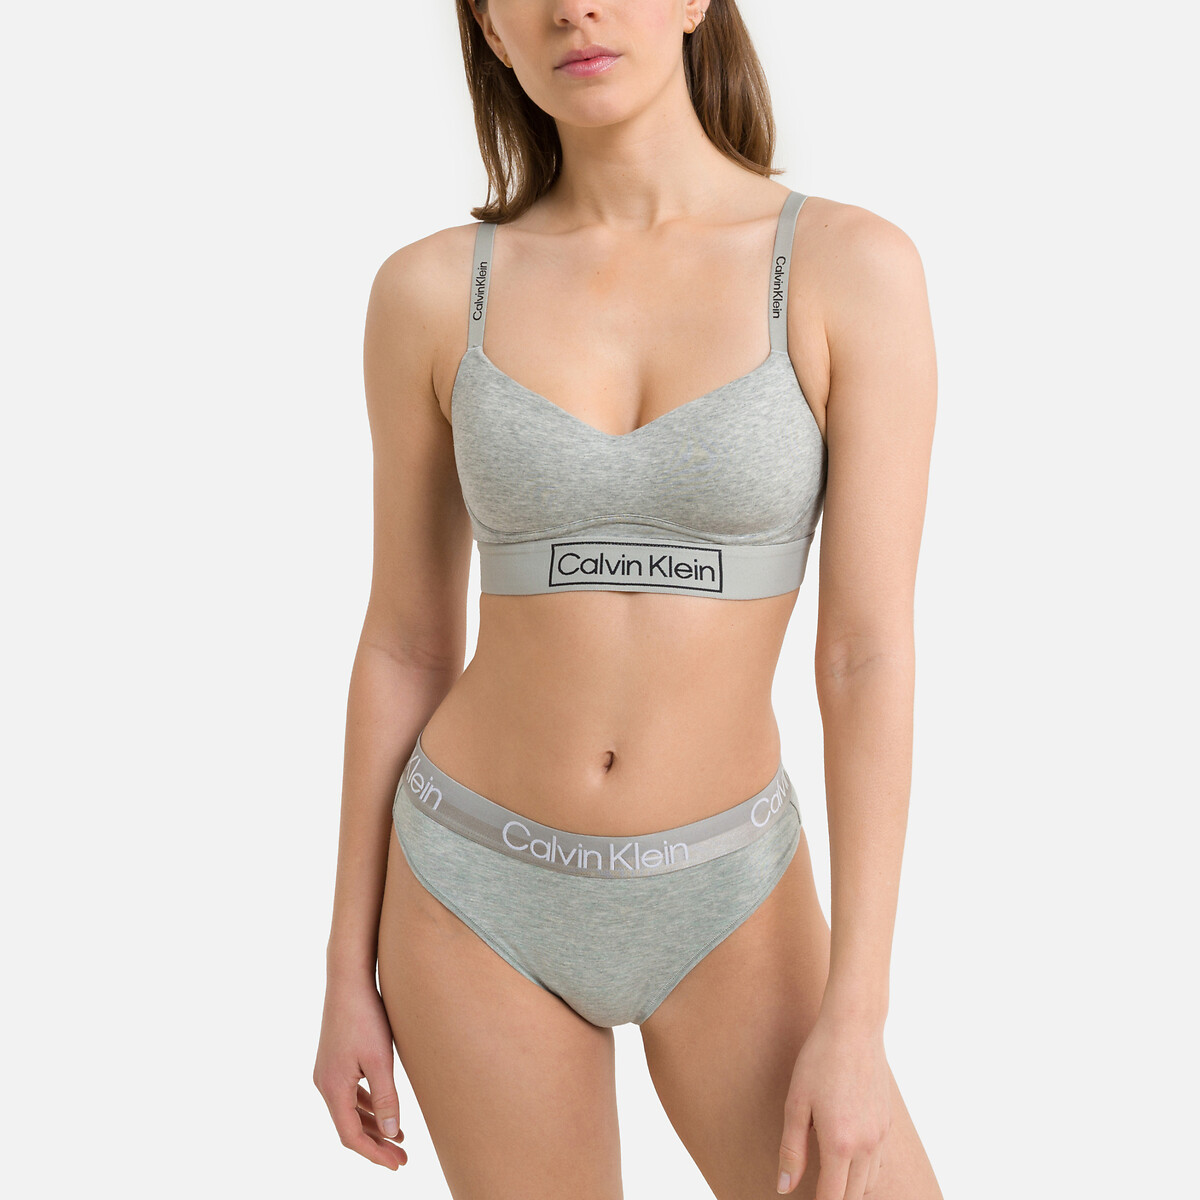 Calvin Klein Future Shift Unlined Bralette With Contrast, 47% OFF